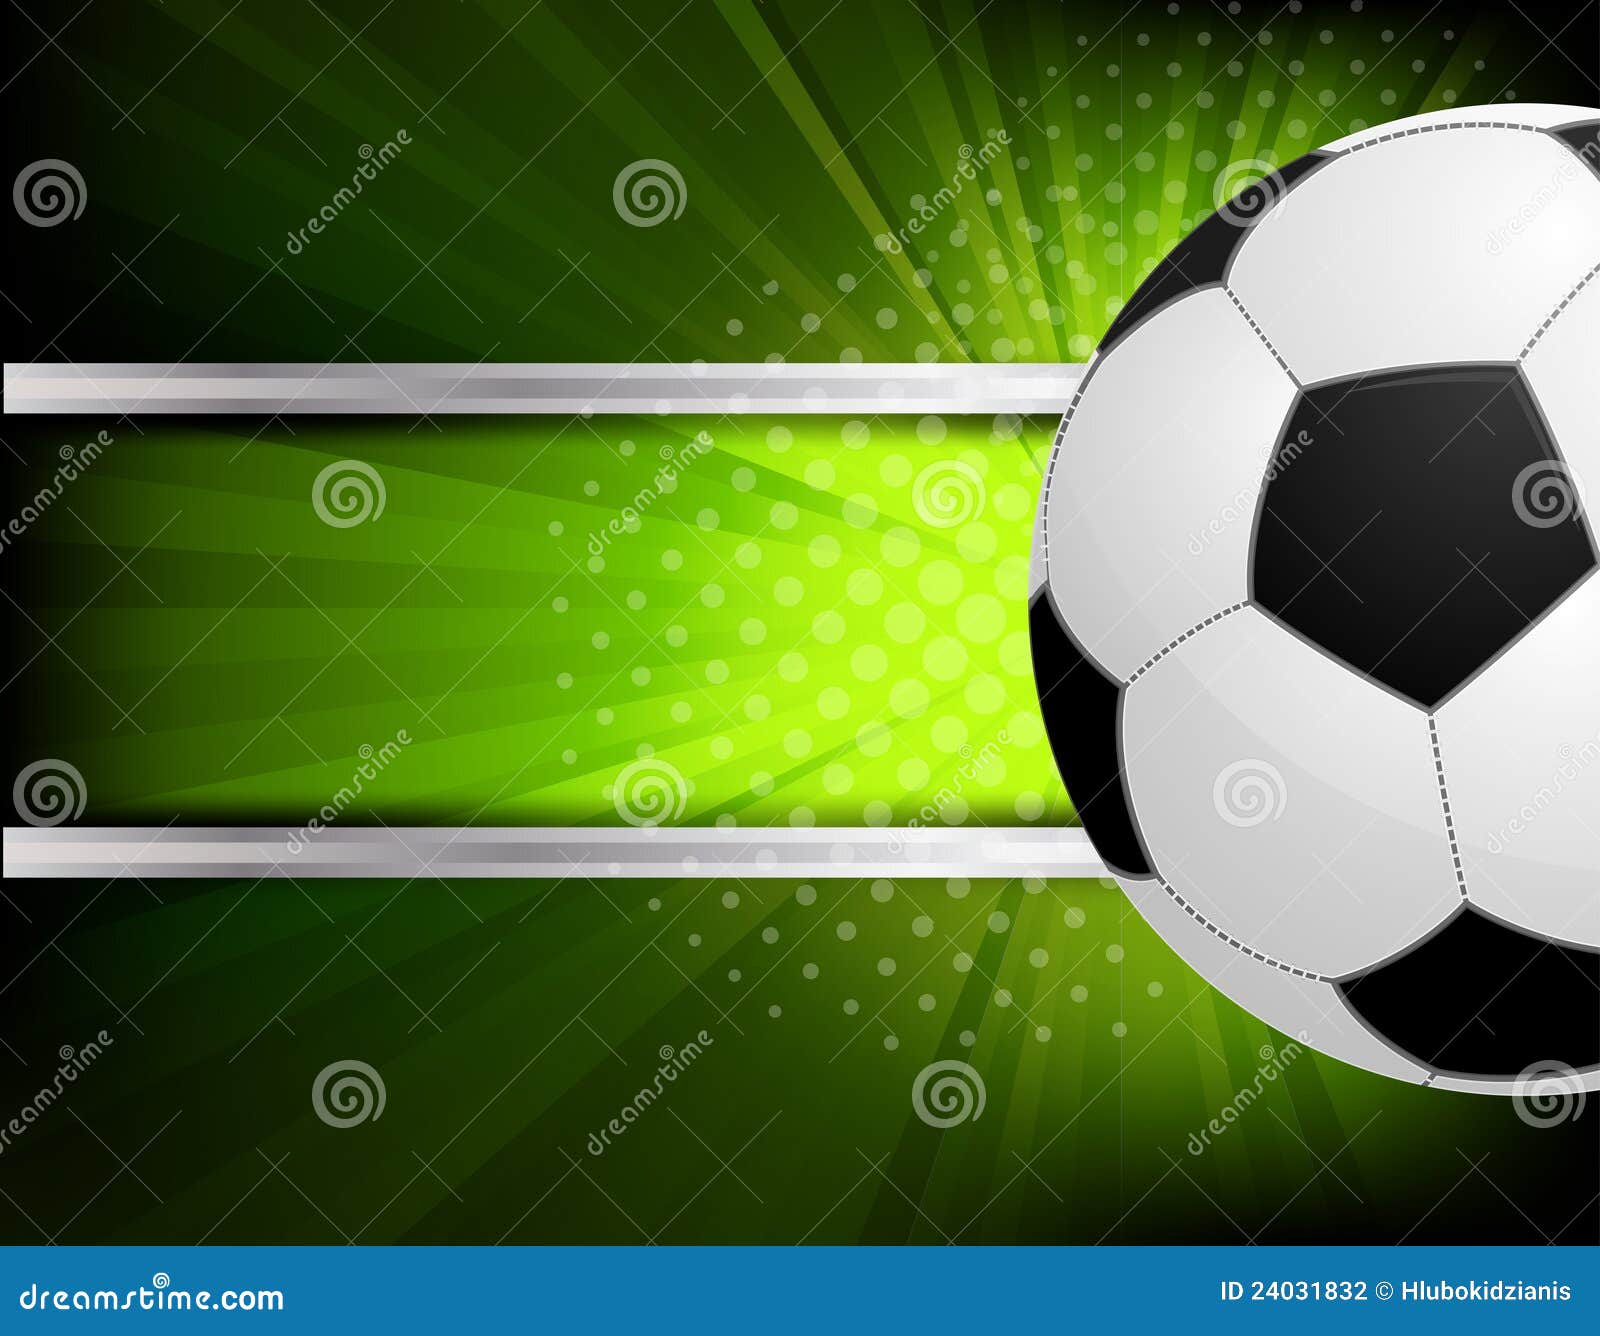 Background With Soccer Ball Stock Vector - Illustration of line, green